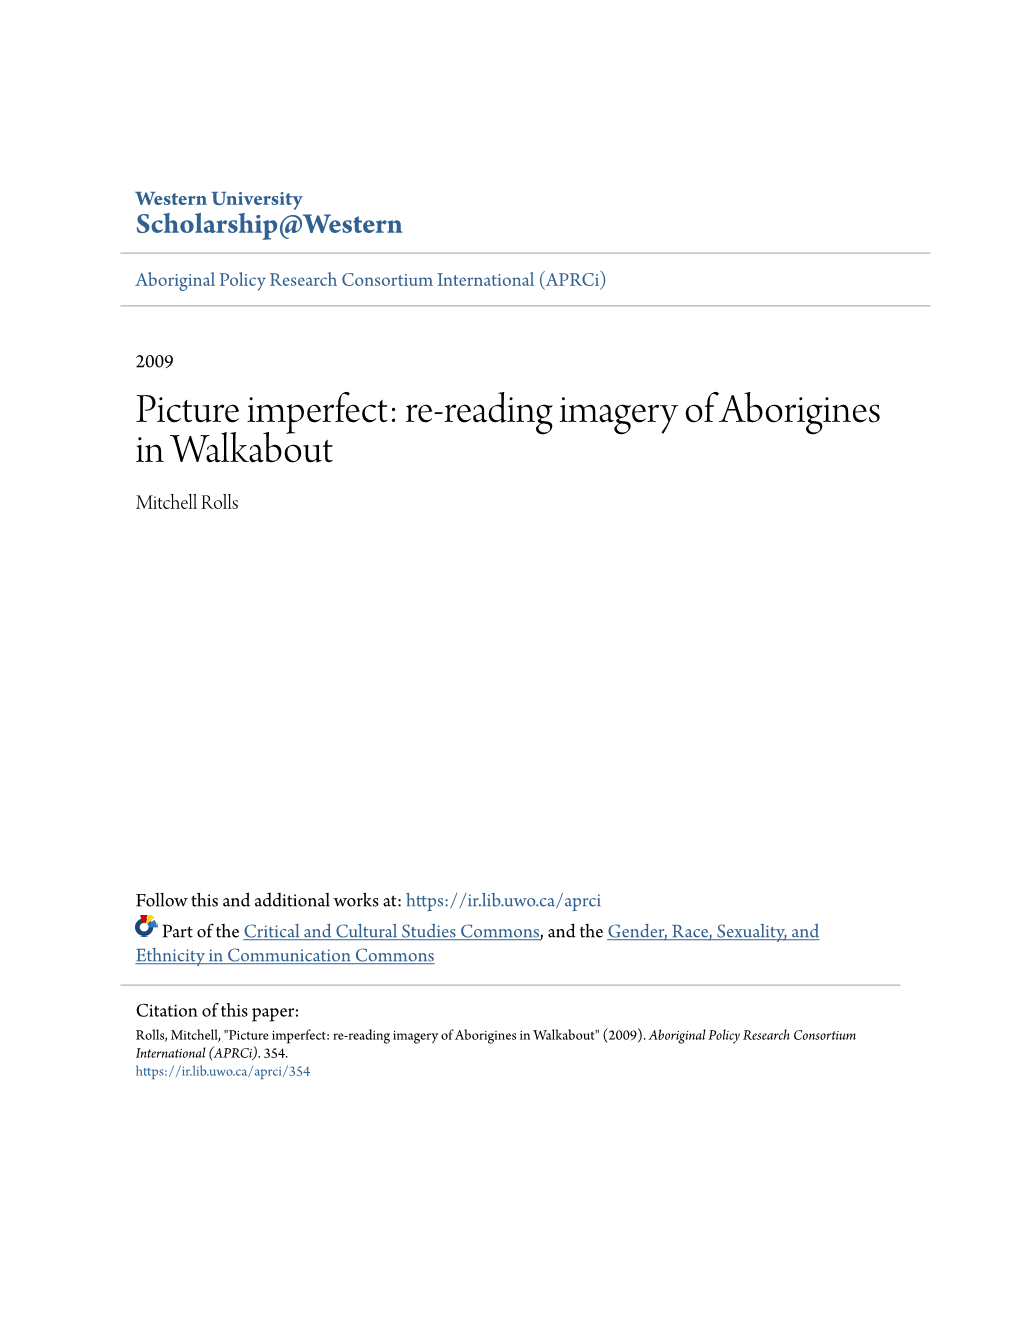 Re-Reading Imagery of Aborigines in Walkabout Mitchell Rolls